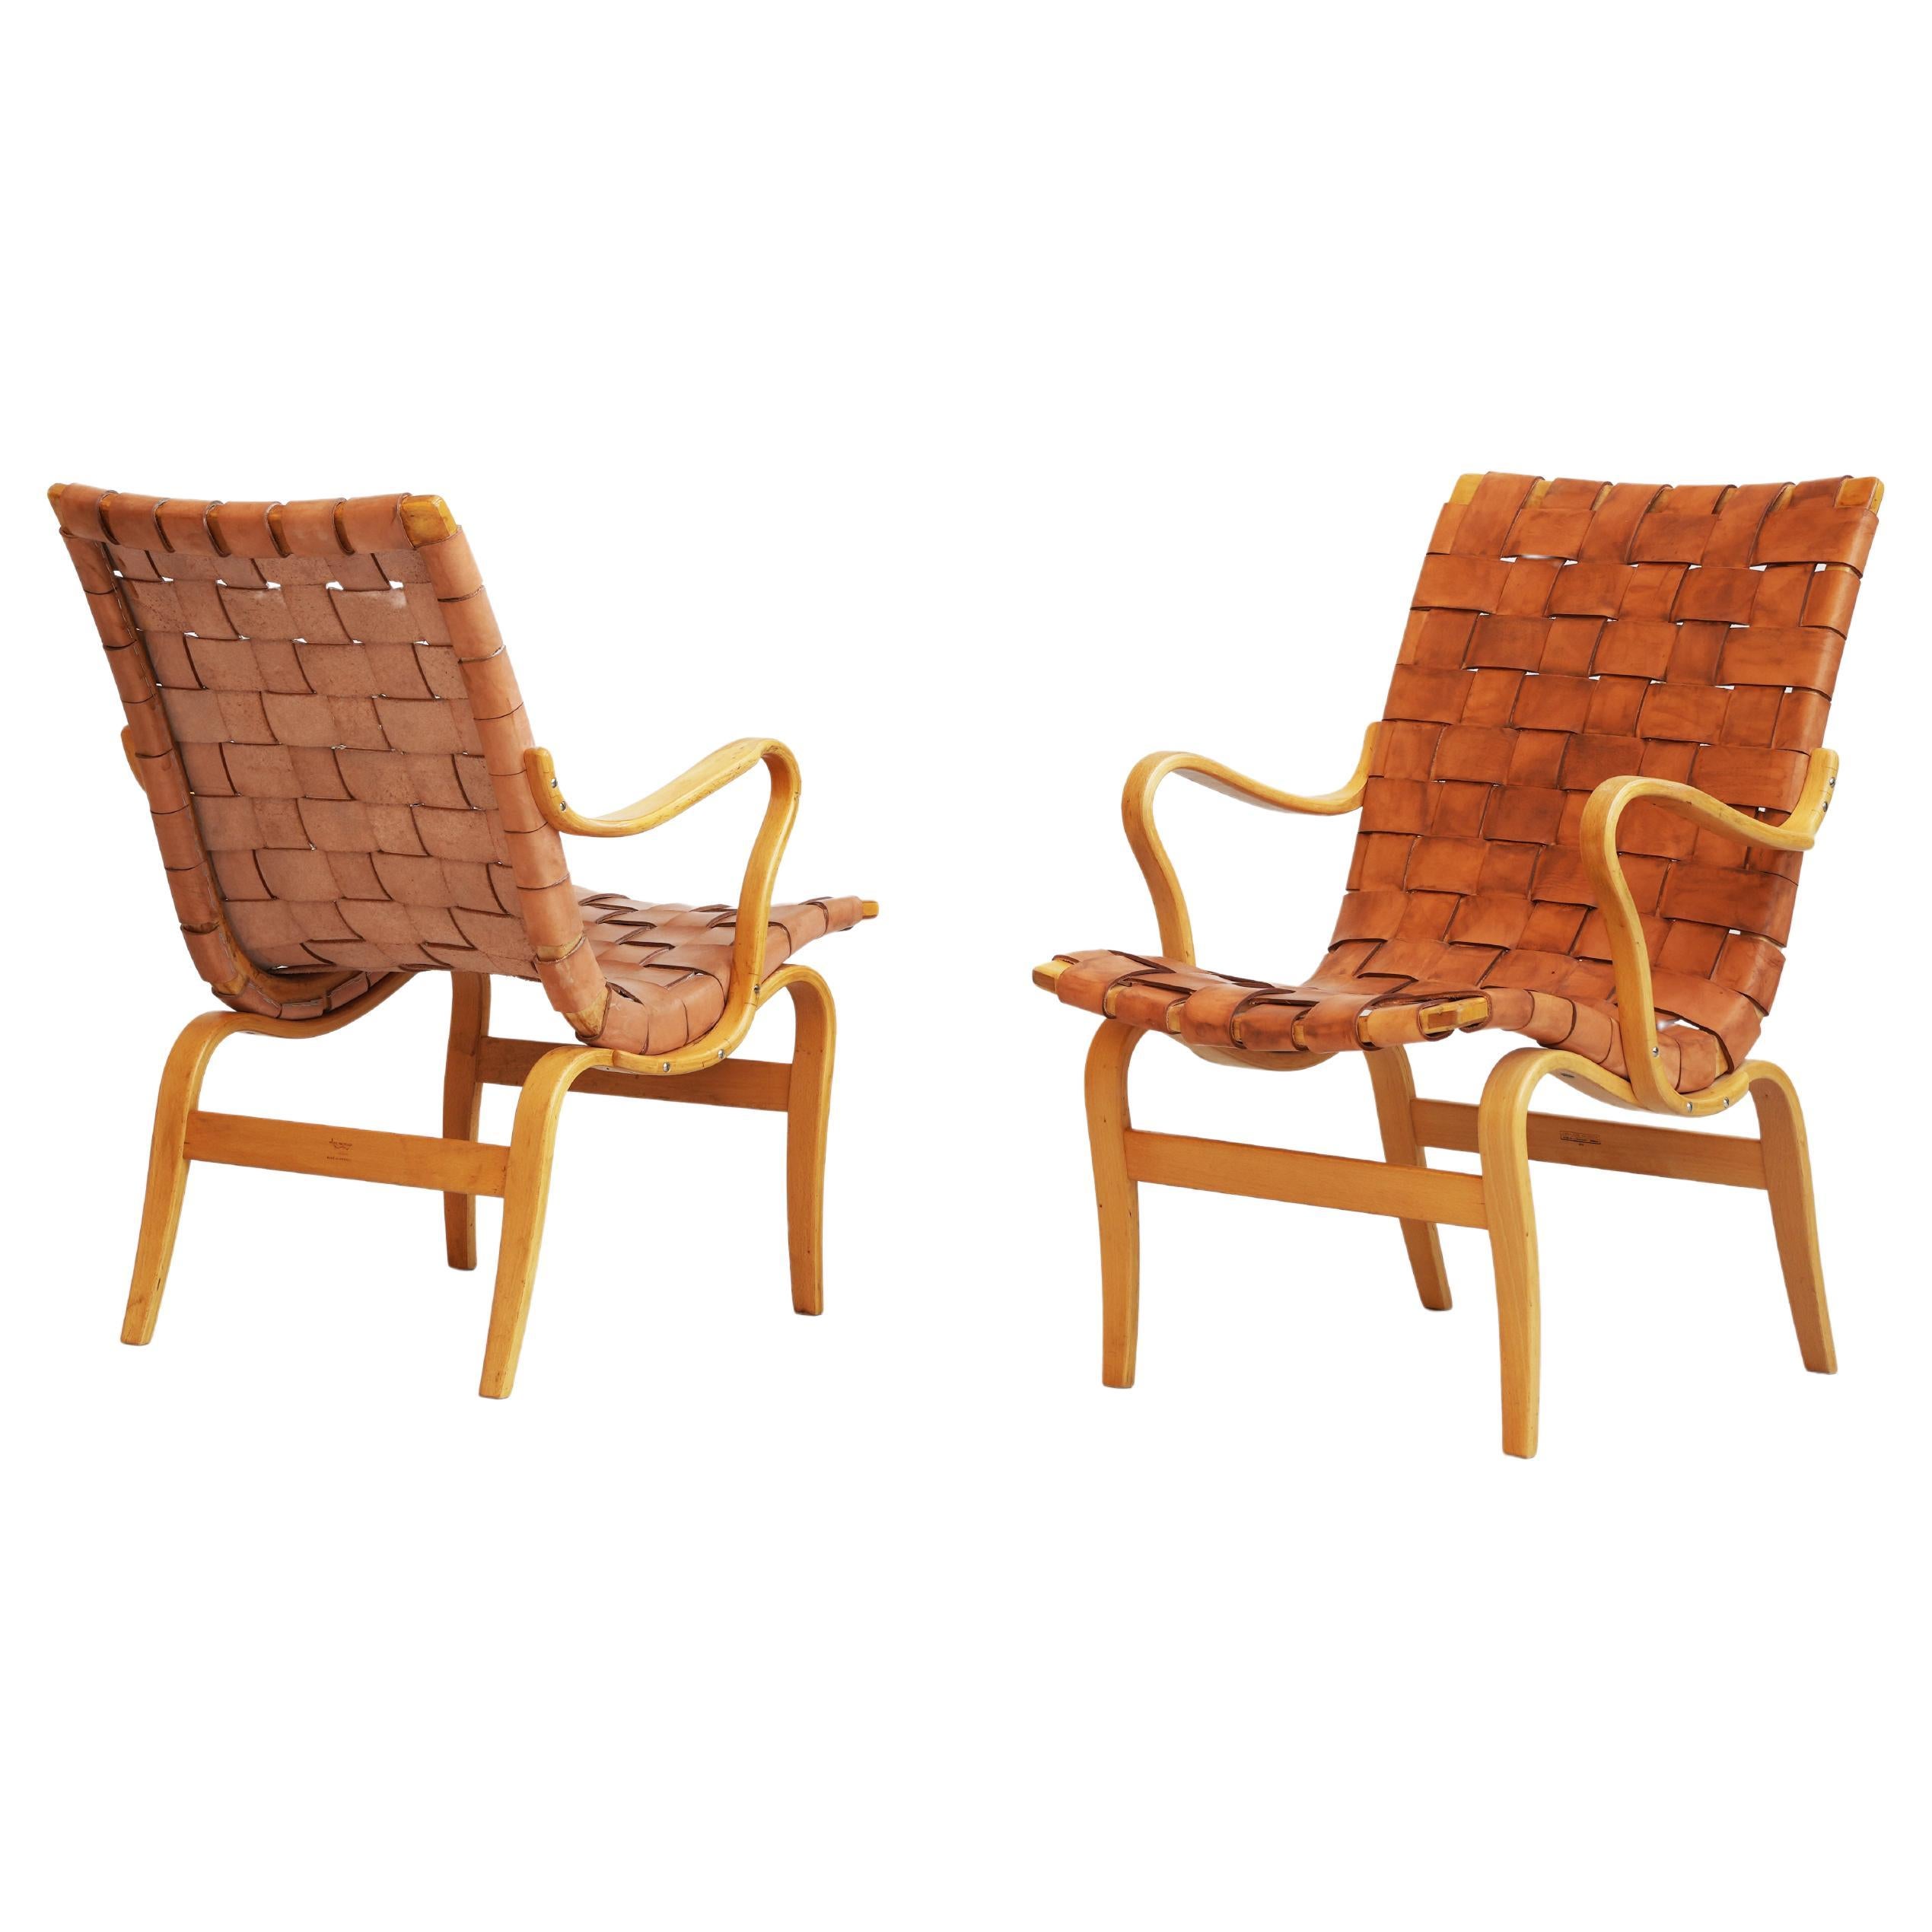 Pair of Swedish Lounge Chairs Mod. Eva by Bruno Mathsson, 1960ies Sweden For Sale